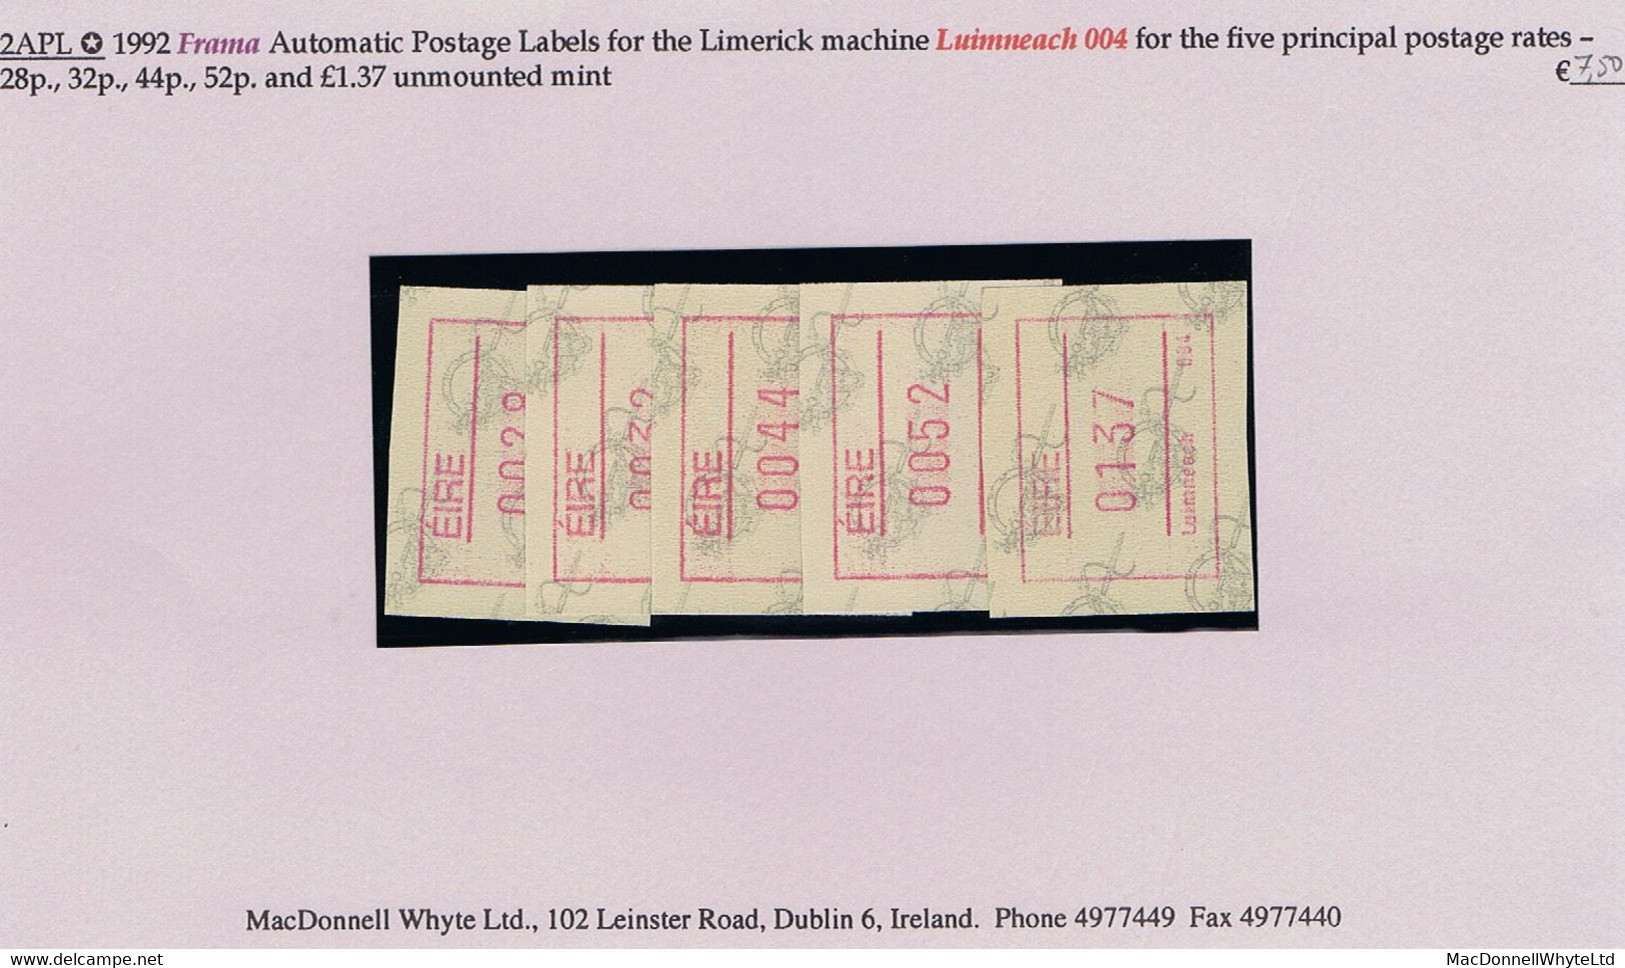 Ireland 1992 Frama Automatic Postage Labels For Limerick 004 Machine For Five Rates 28p, 32p, 44p, 52p, £1.37 Mint - Franking Labels